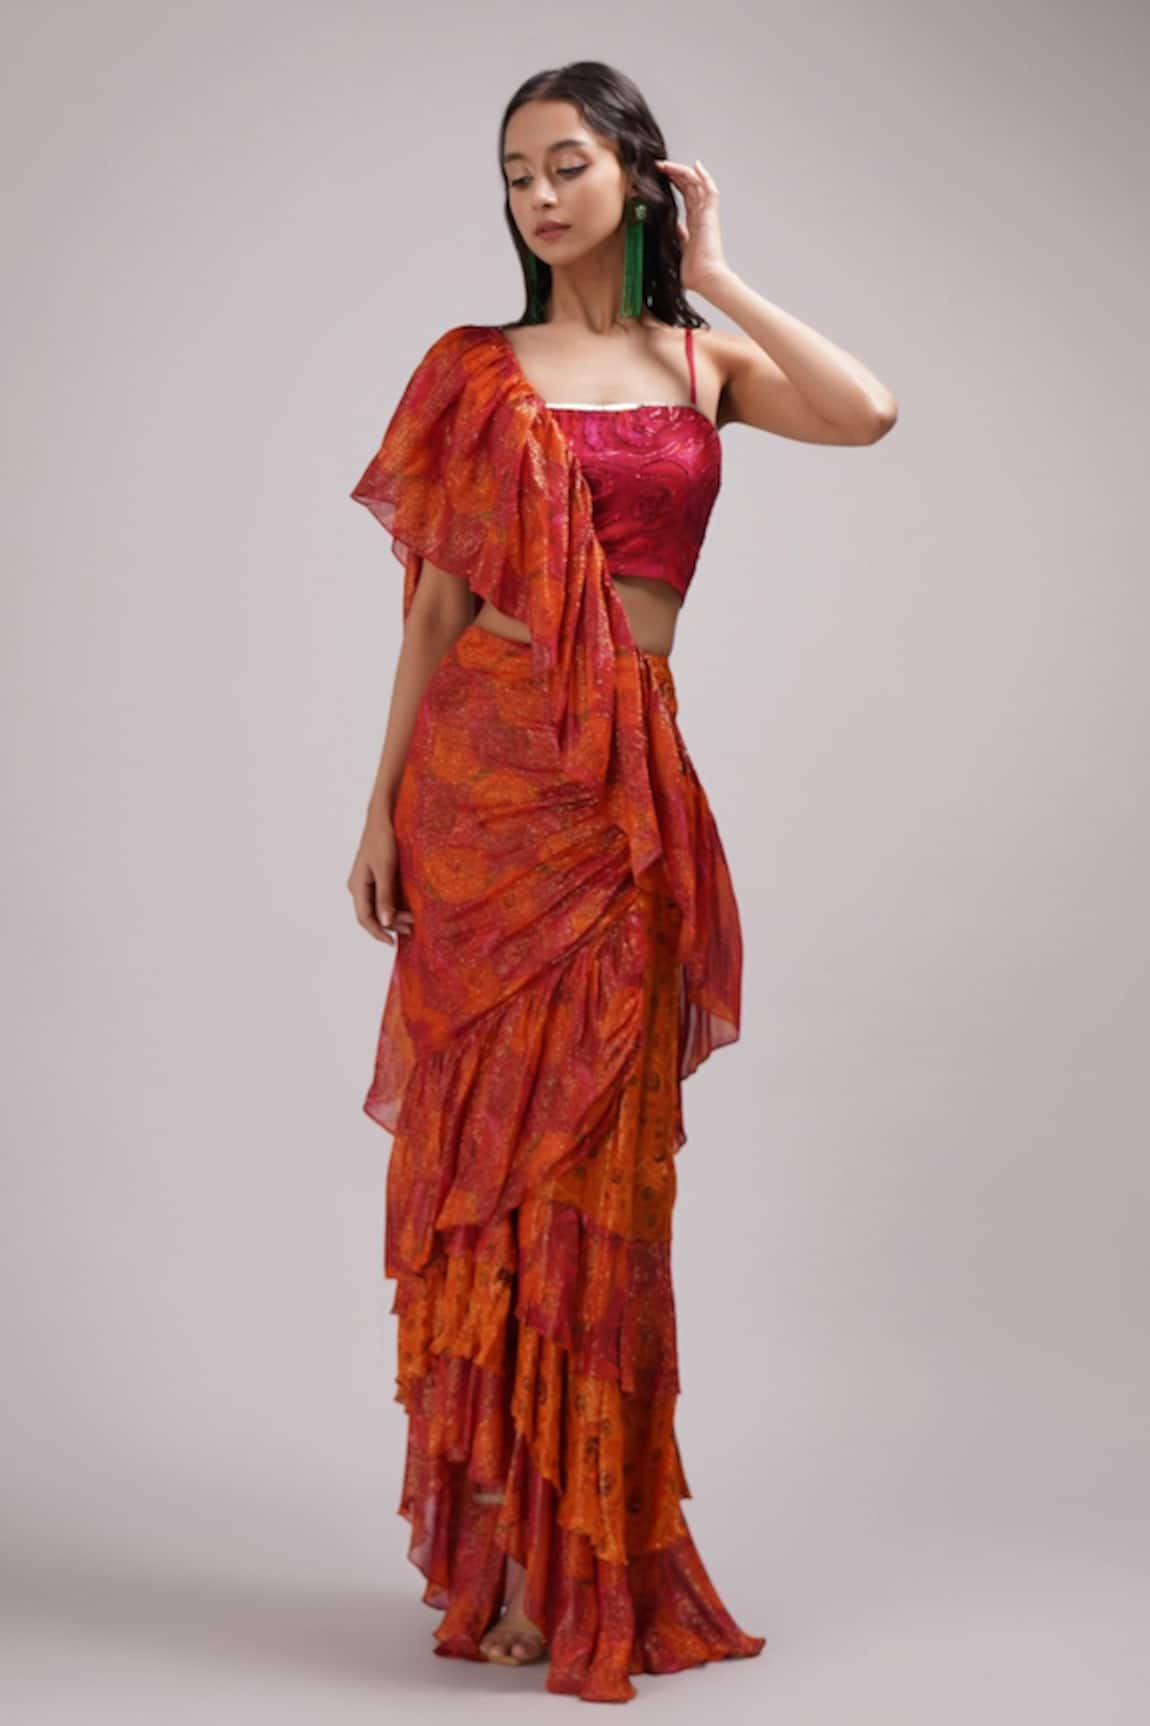 Breathe by Aakanksha Singh Jonquil Printed Draped Saree With Blouse